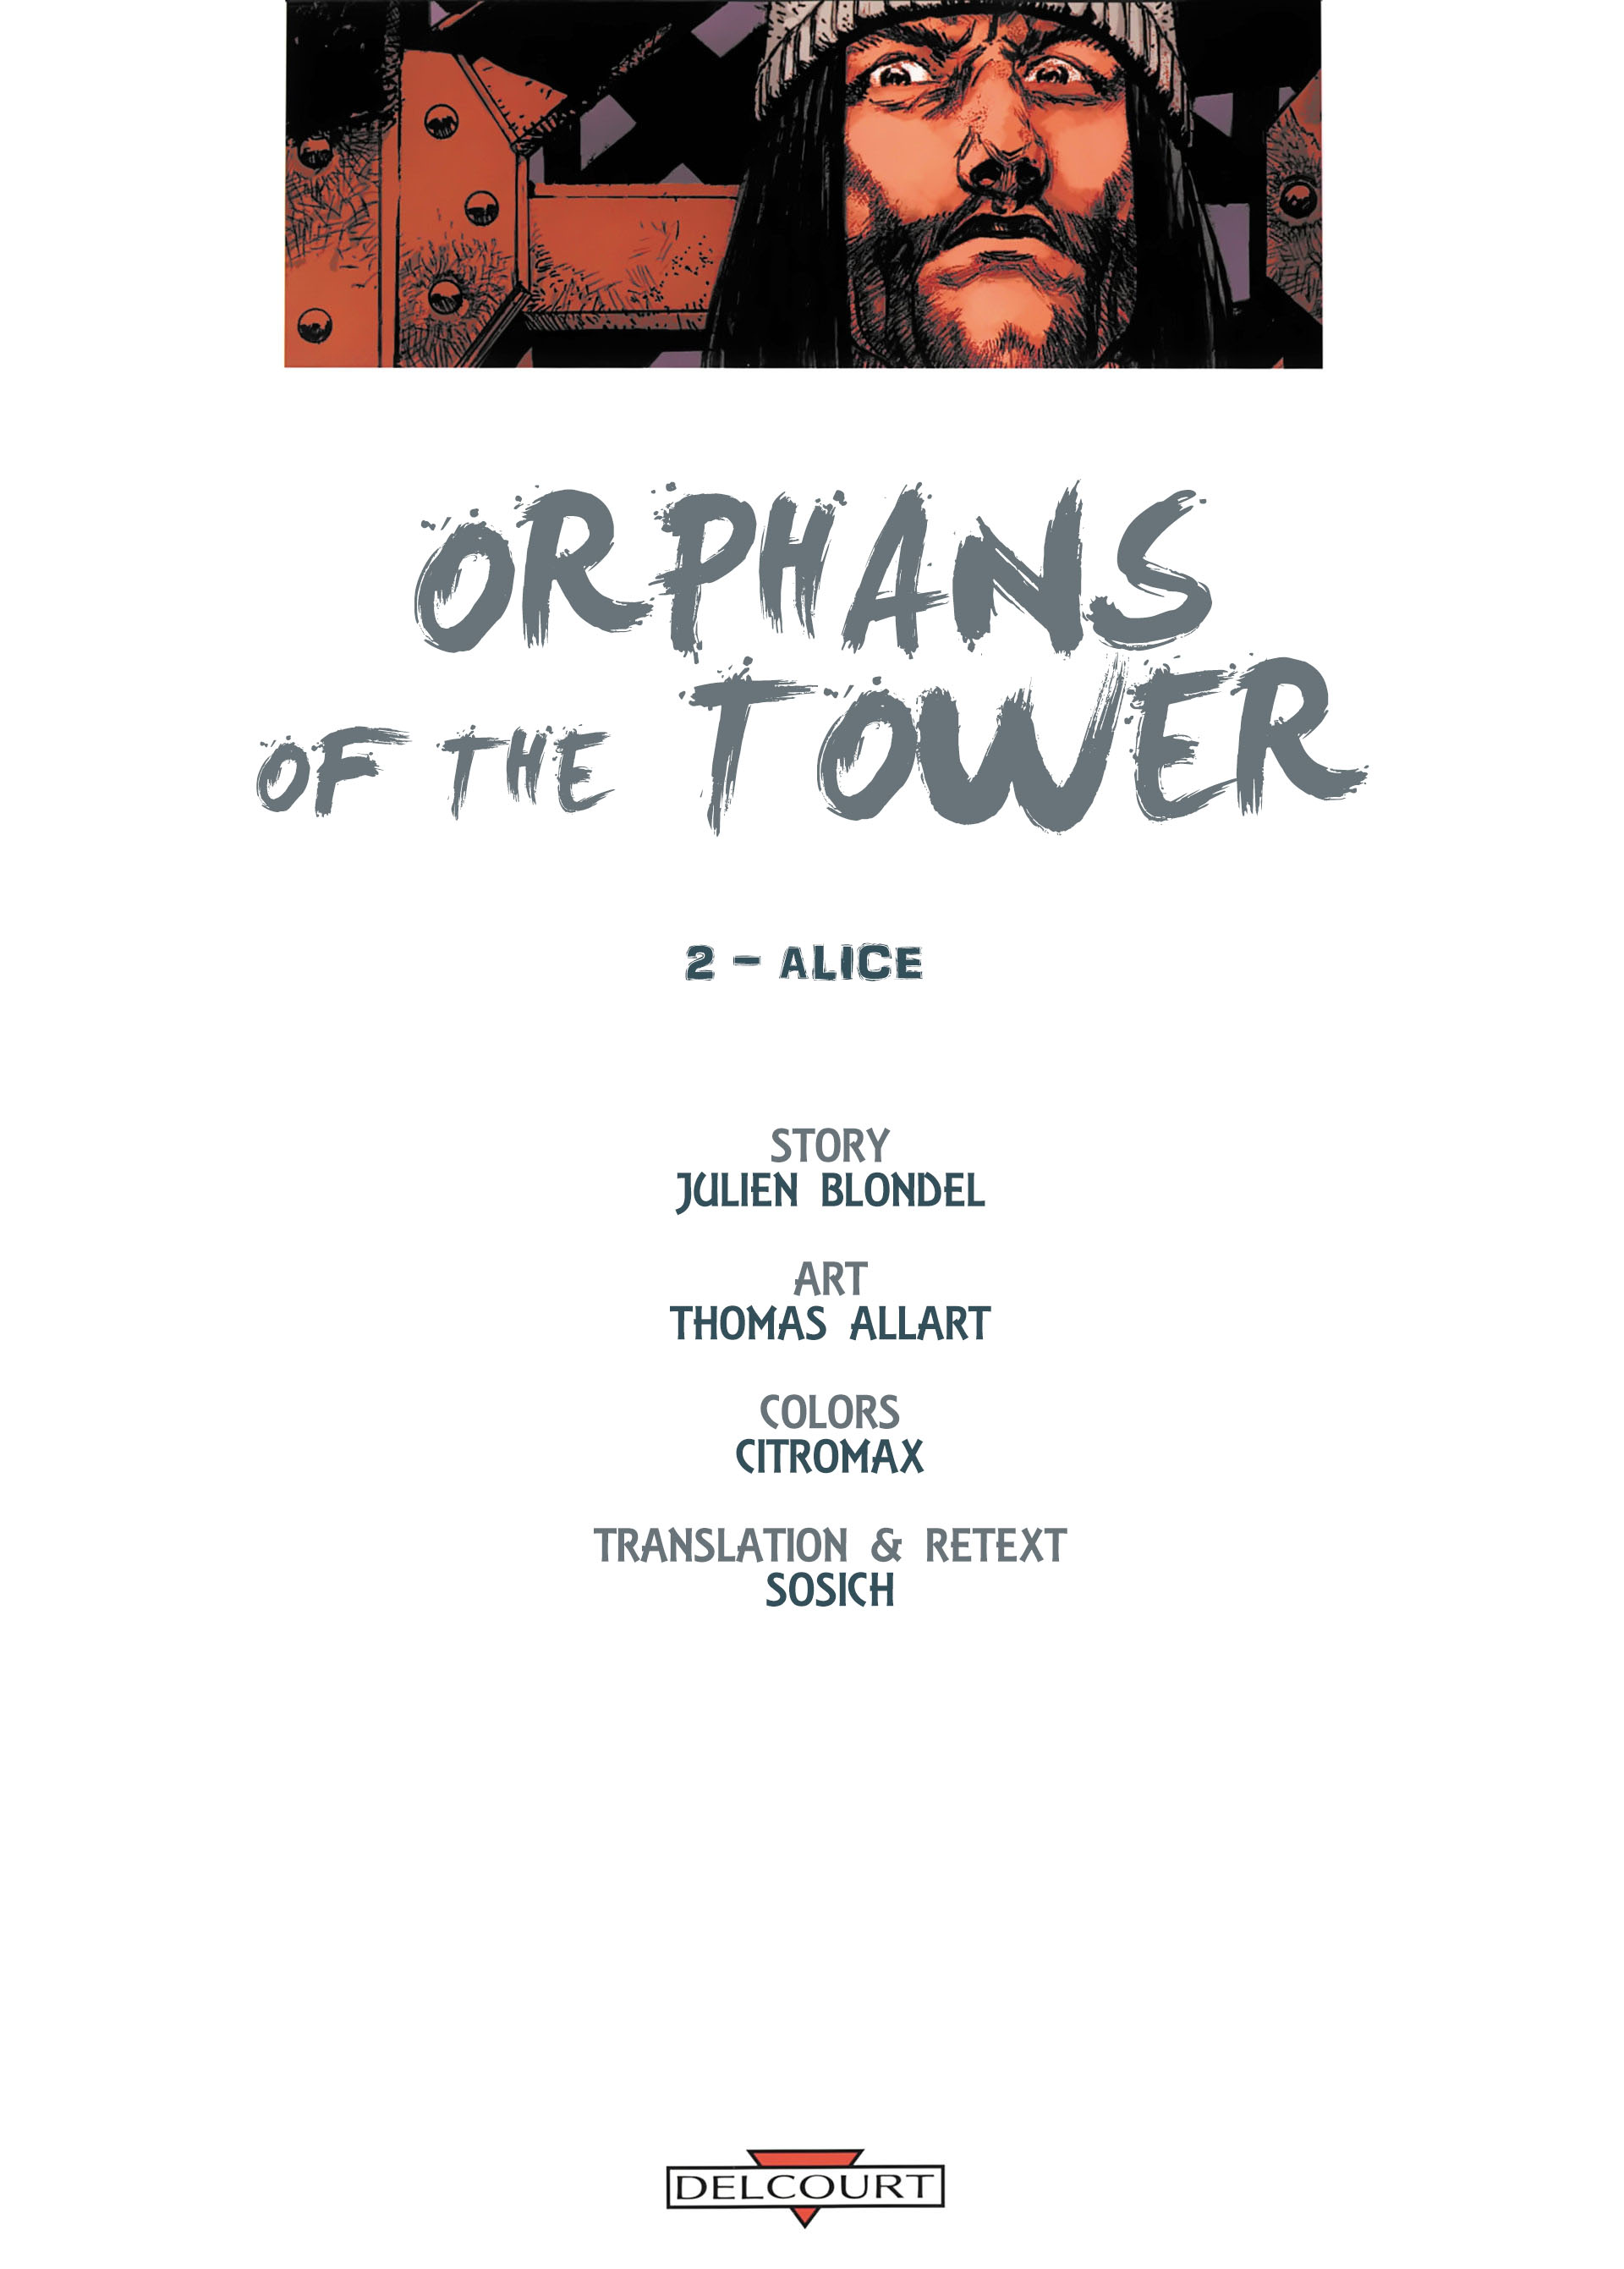 Read online Orphans of the Tower comic -  Issue #2 - 2